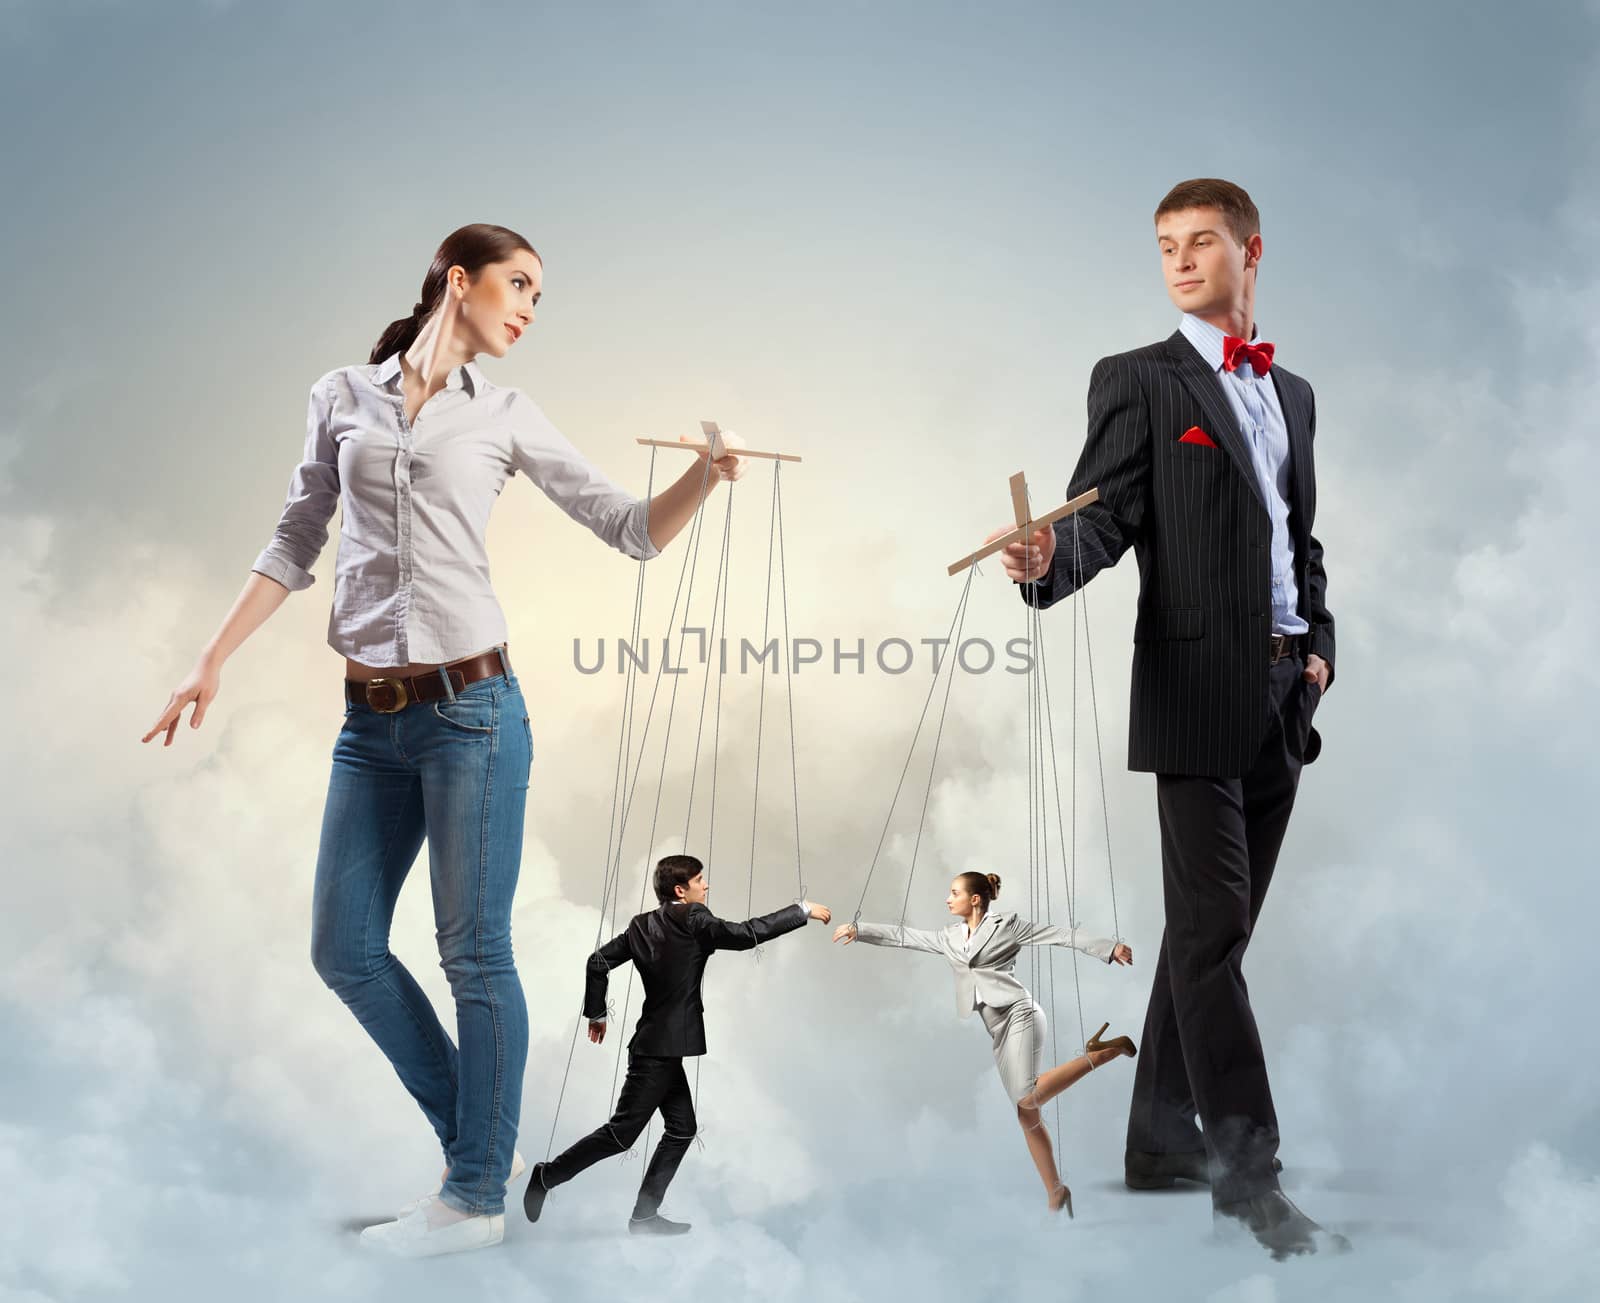 Image of man and woman with marionette puppets